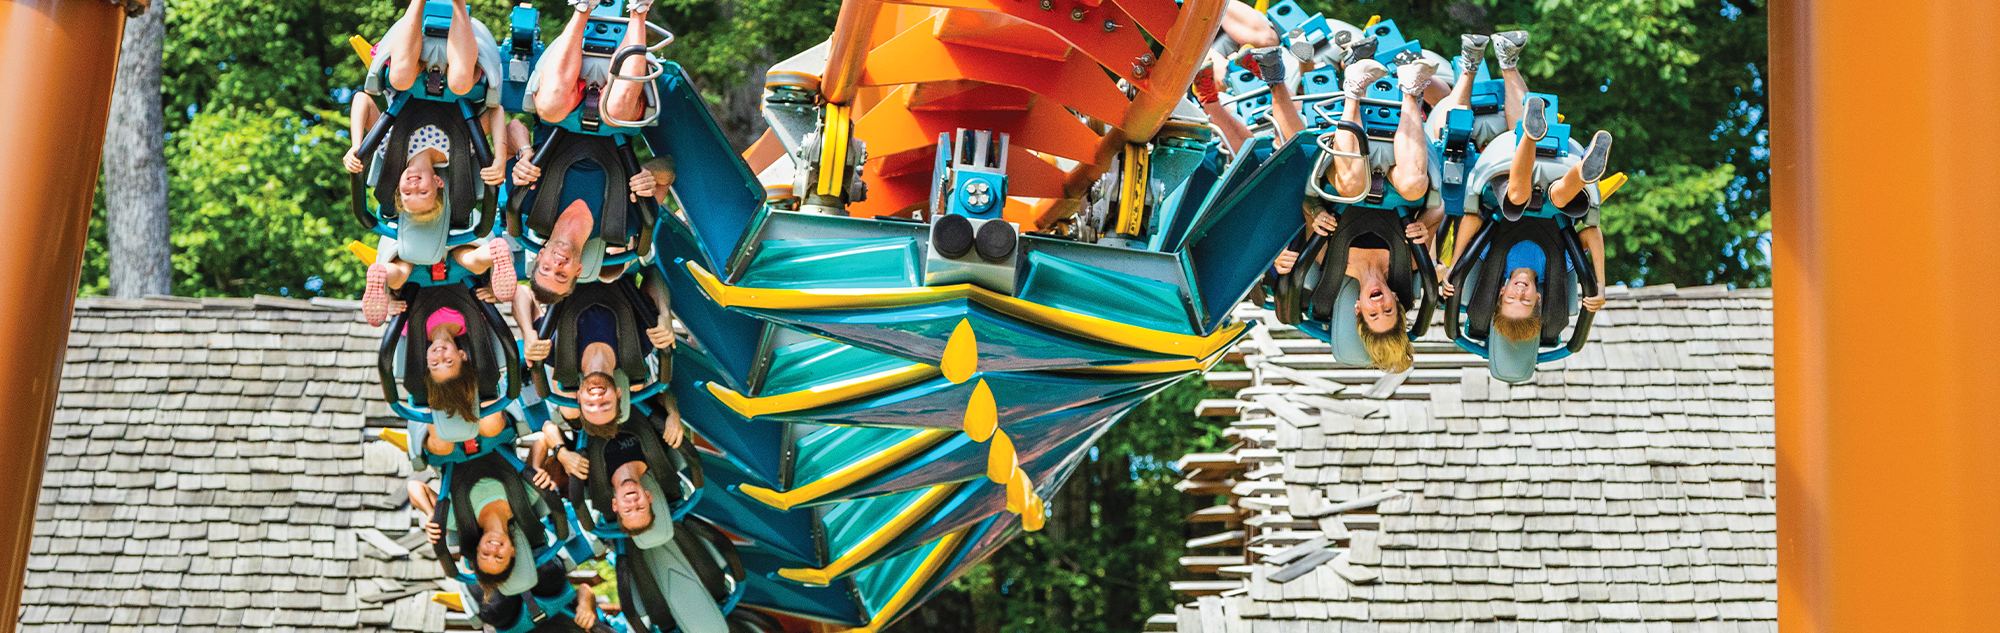 A roller coaster train on Thunderbird goes through an inline roll. You can see riders in all of the visible seats are upside down.